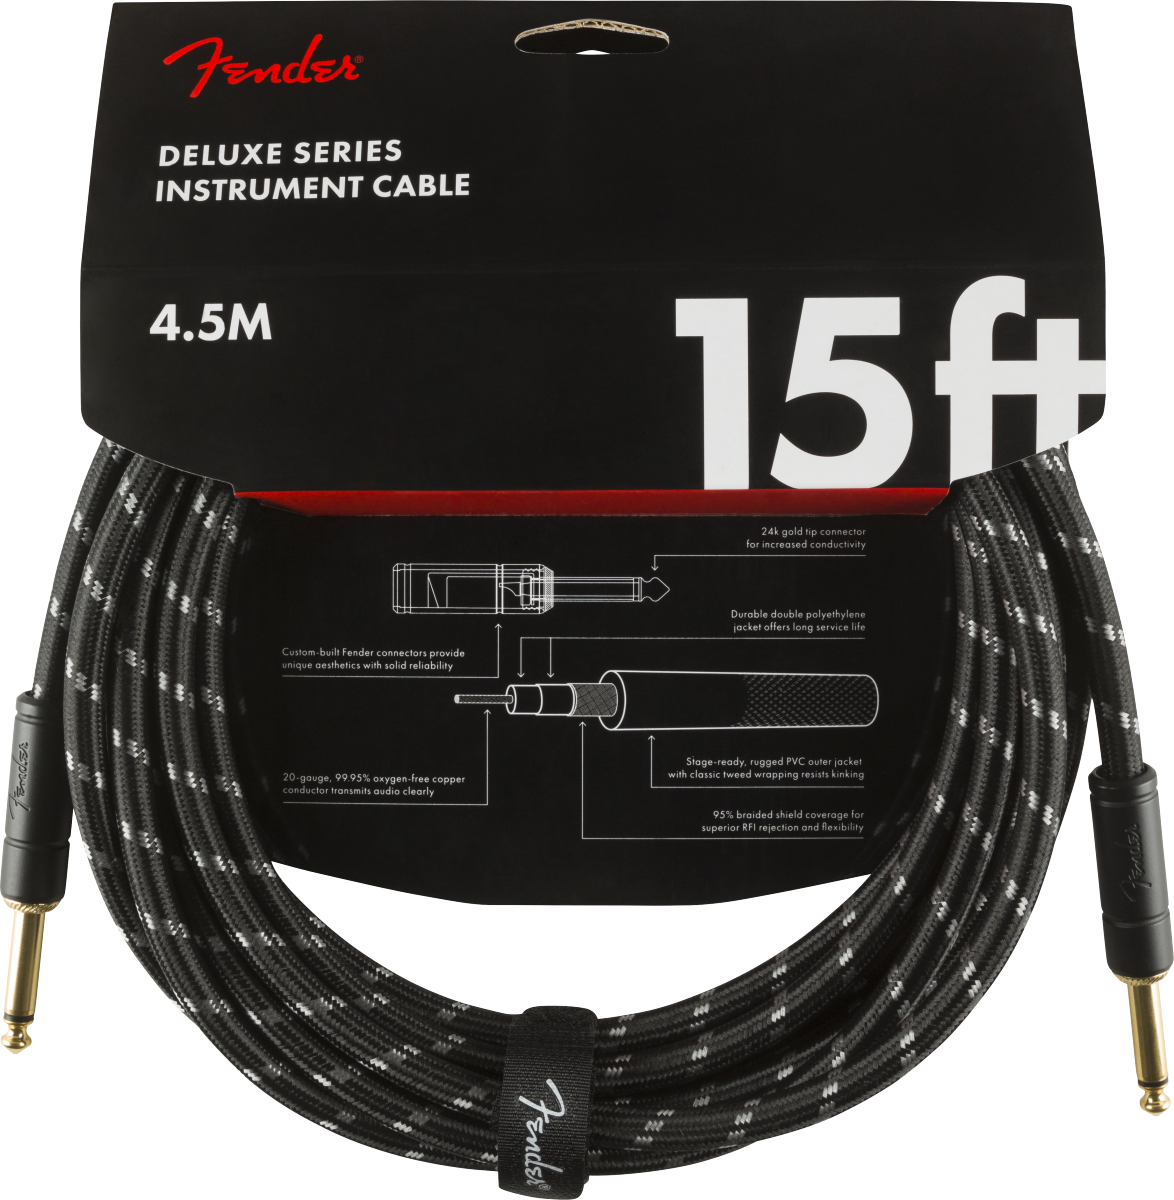 Fender Deluxe Instrument Cable Droit/droit 15ft Black Tweed - Cable - Variation 1